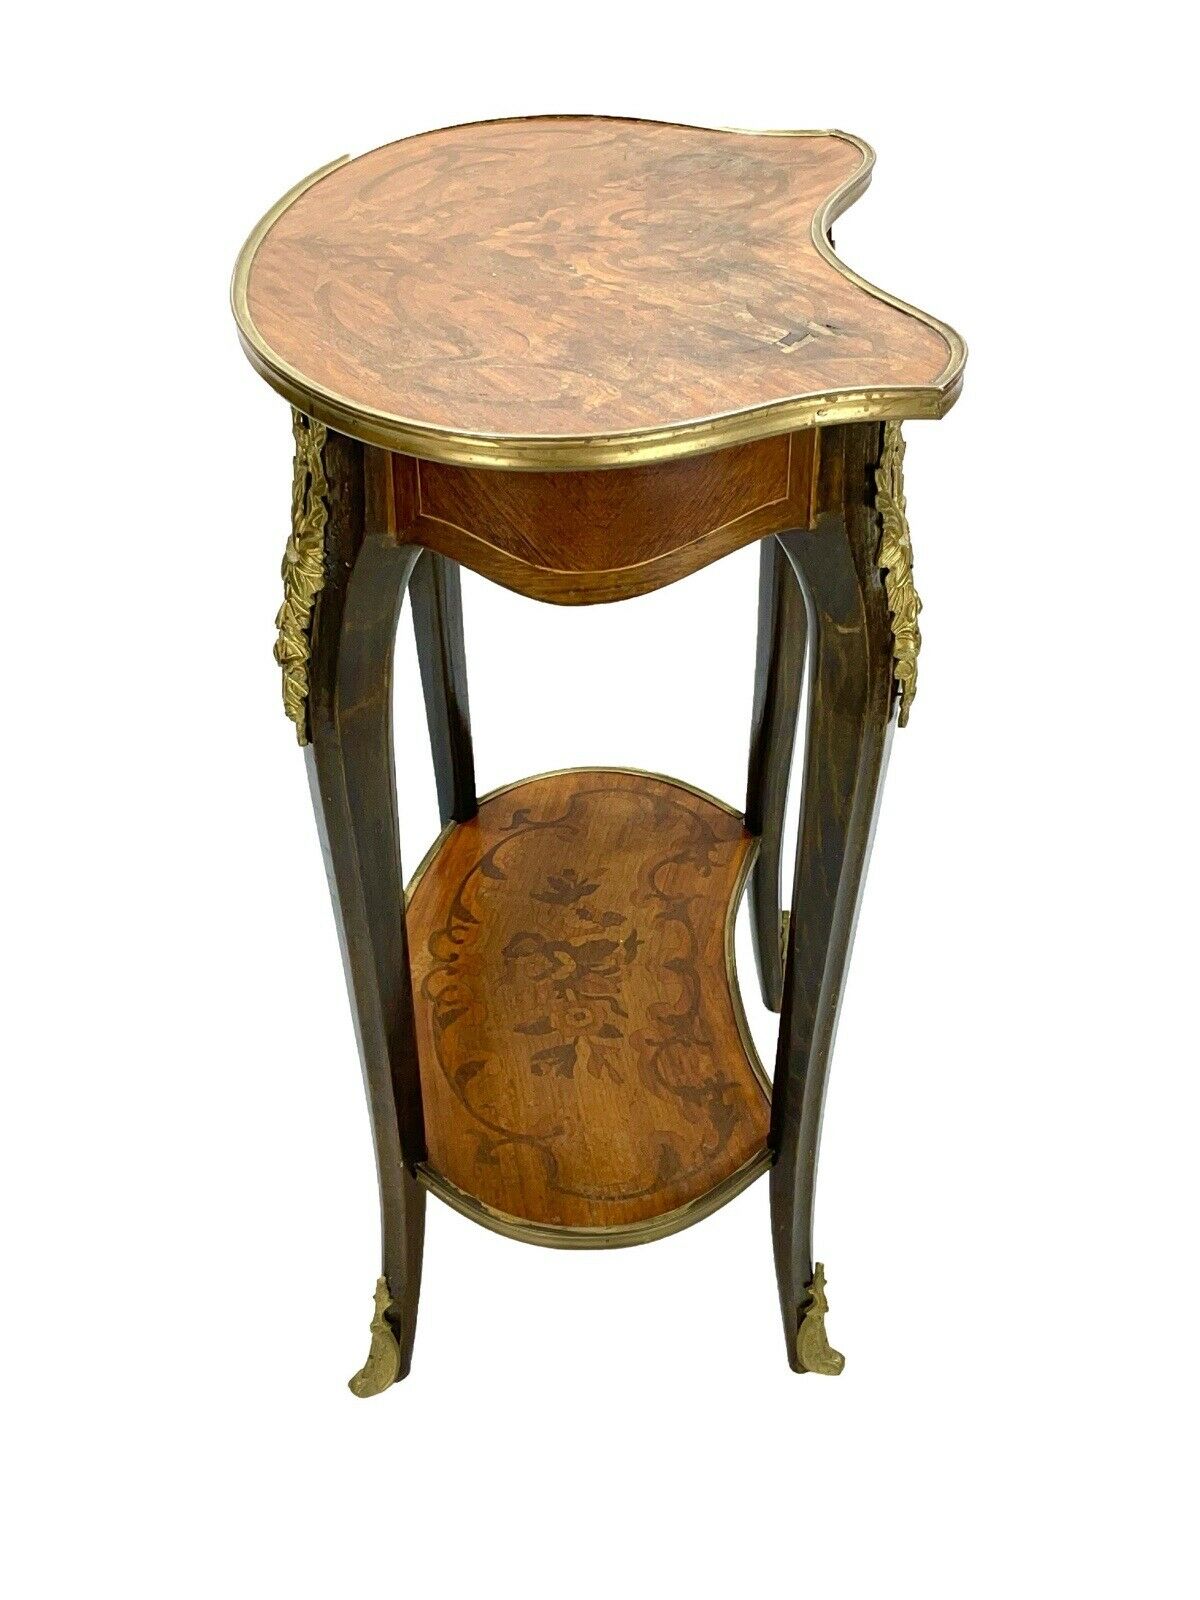 Pair Of Louis XVI Style Kidney Shaped Tables